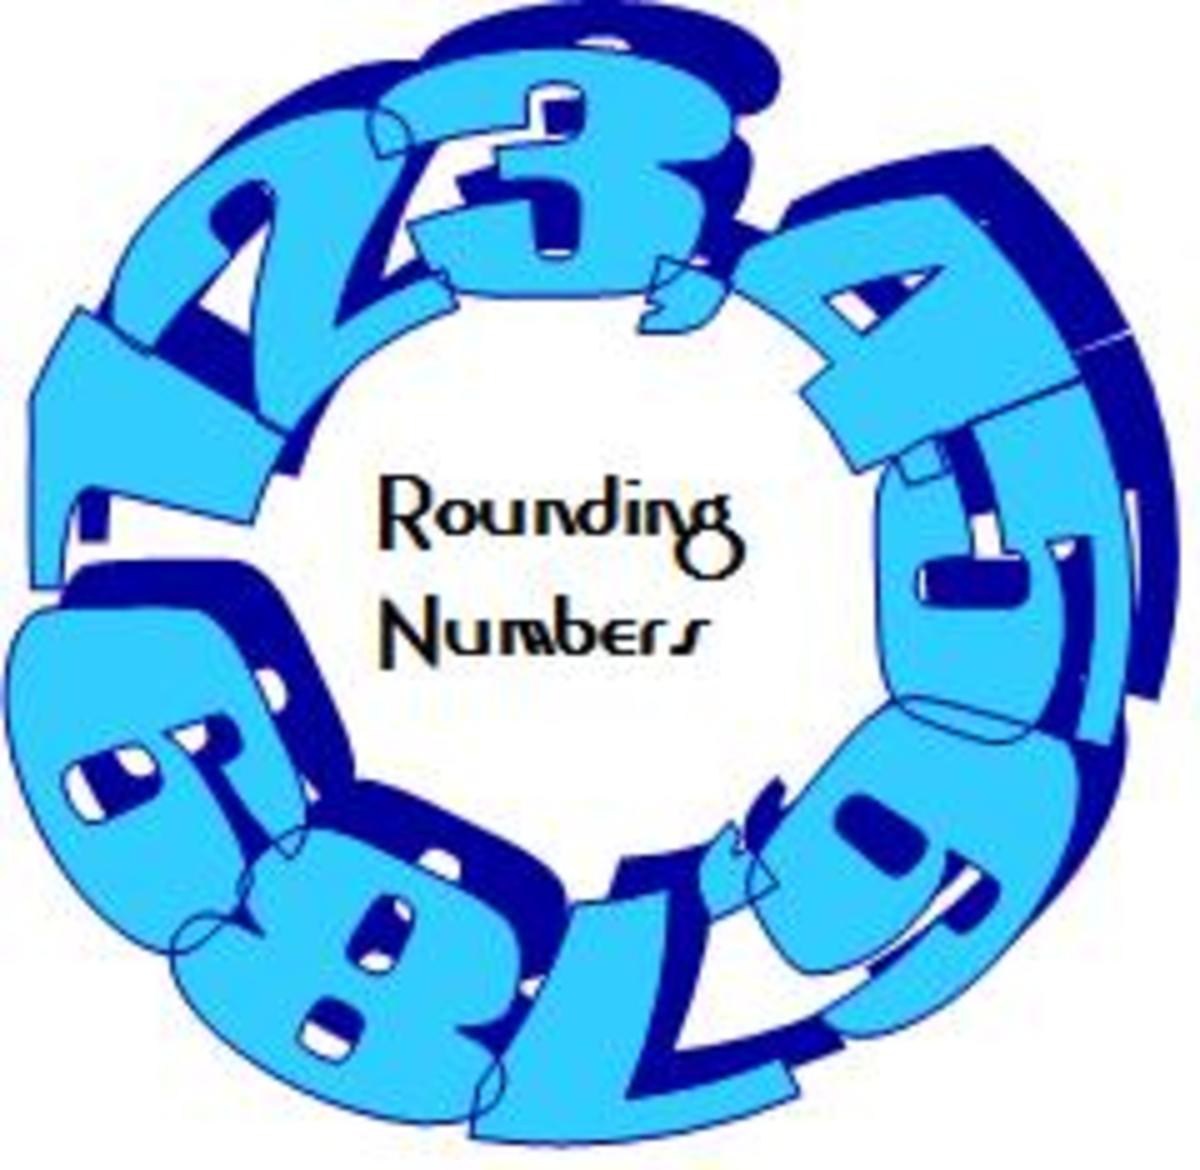 tricks-of-the-teaching-trade-rounding-numbers-round-up